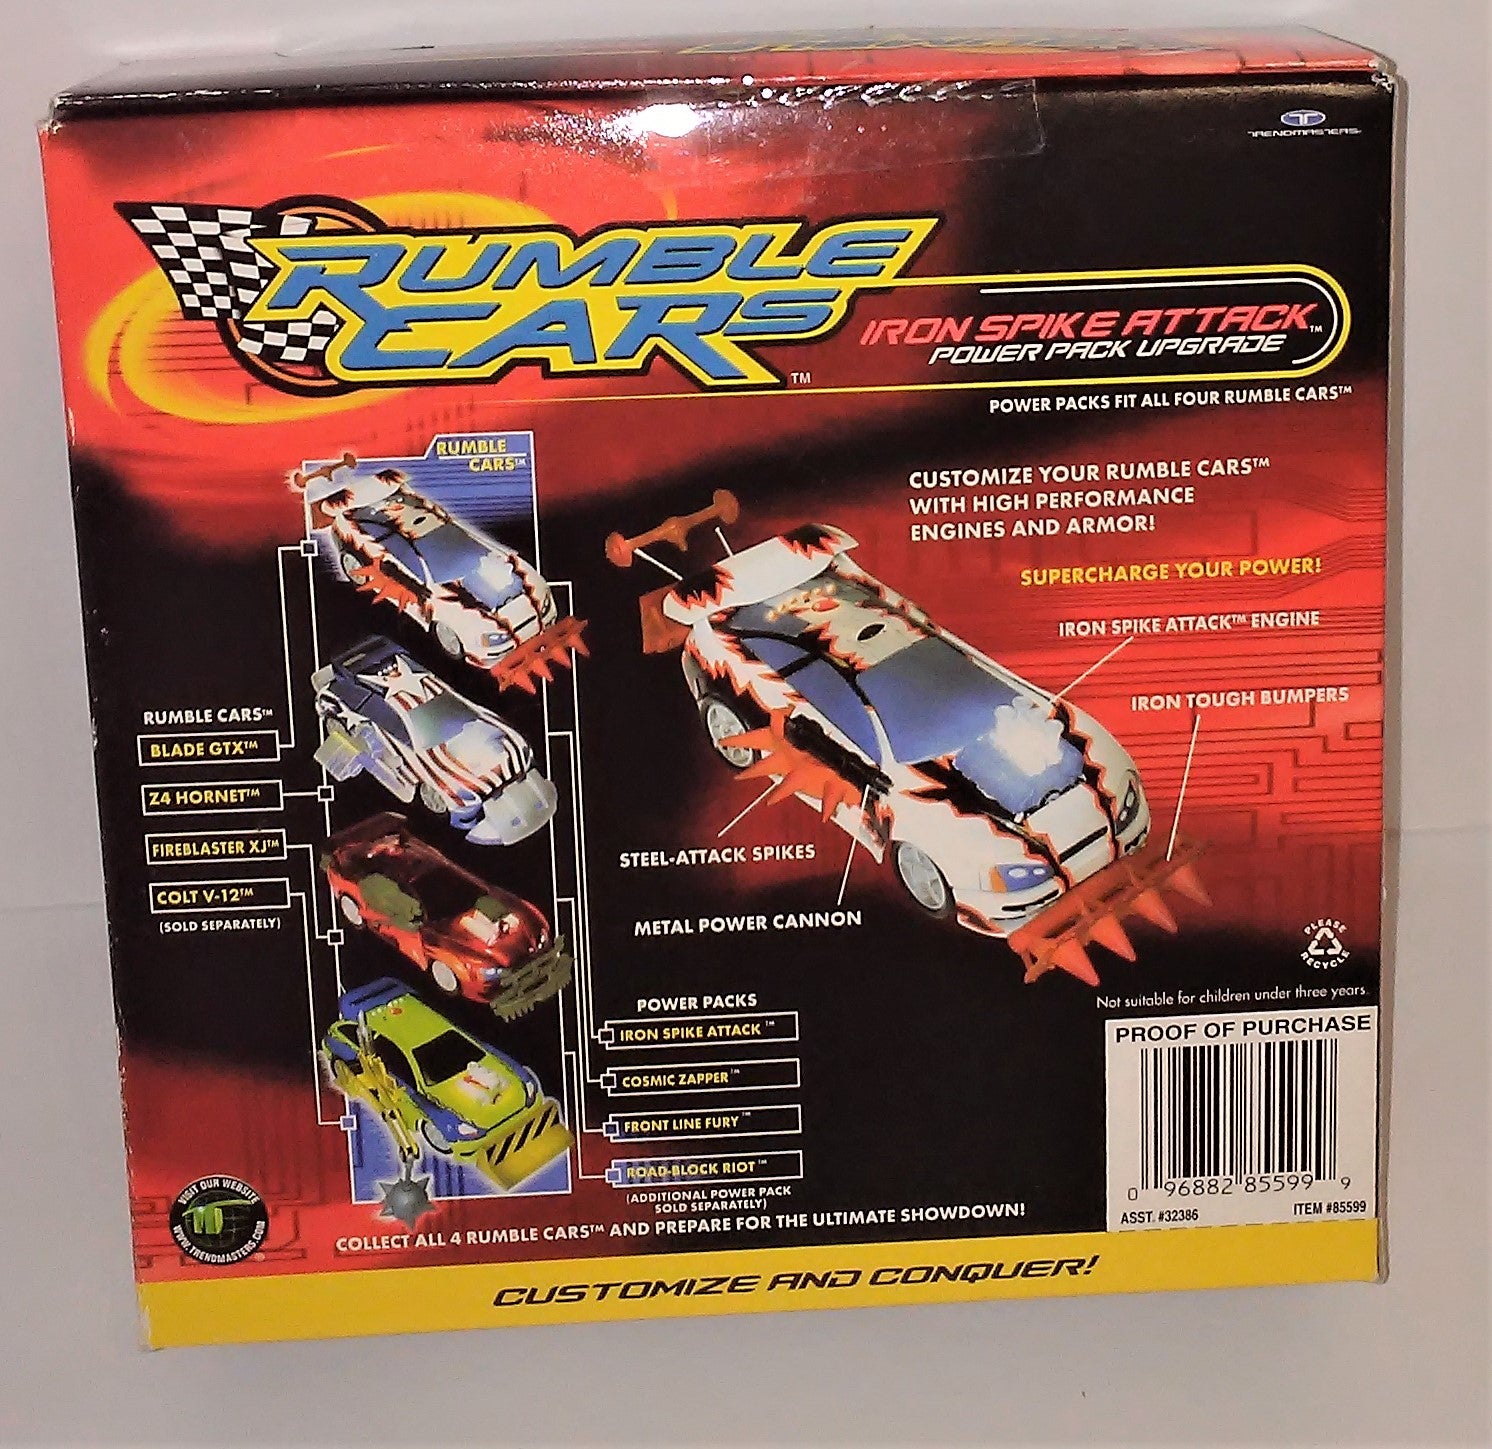 https://sandeesmemoriesandcollectibles.com/cdn/shop/products/Rumble_Cars_Iron_Spike_Attack_Power_Pack_Upgrade_back.jpg?v=1606514519